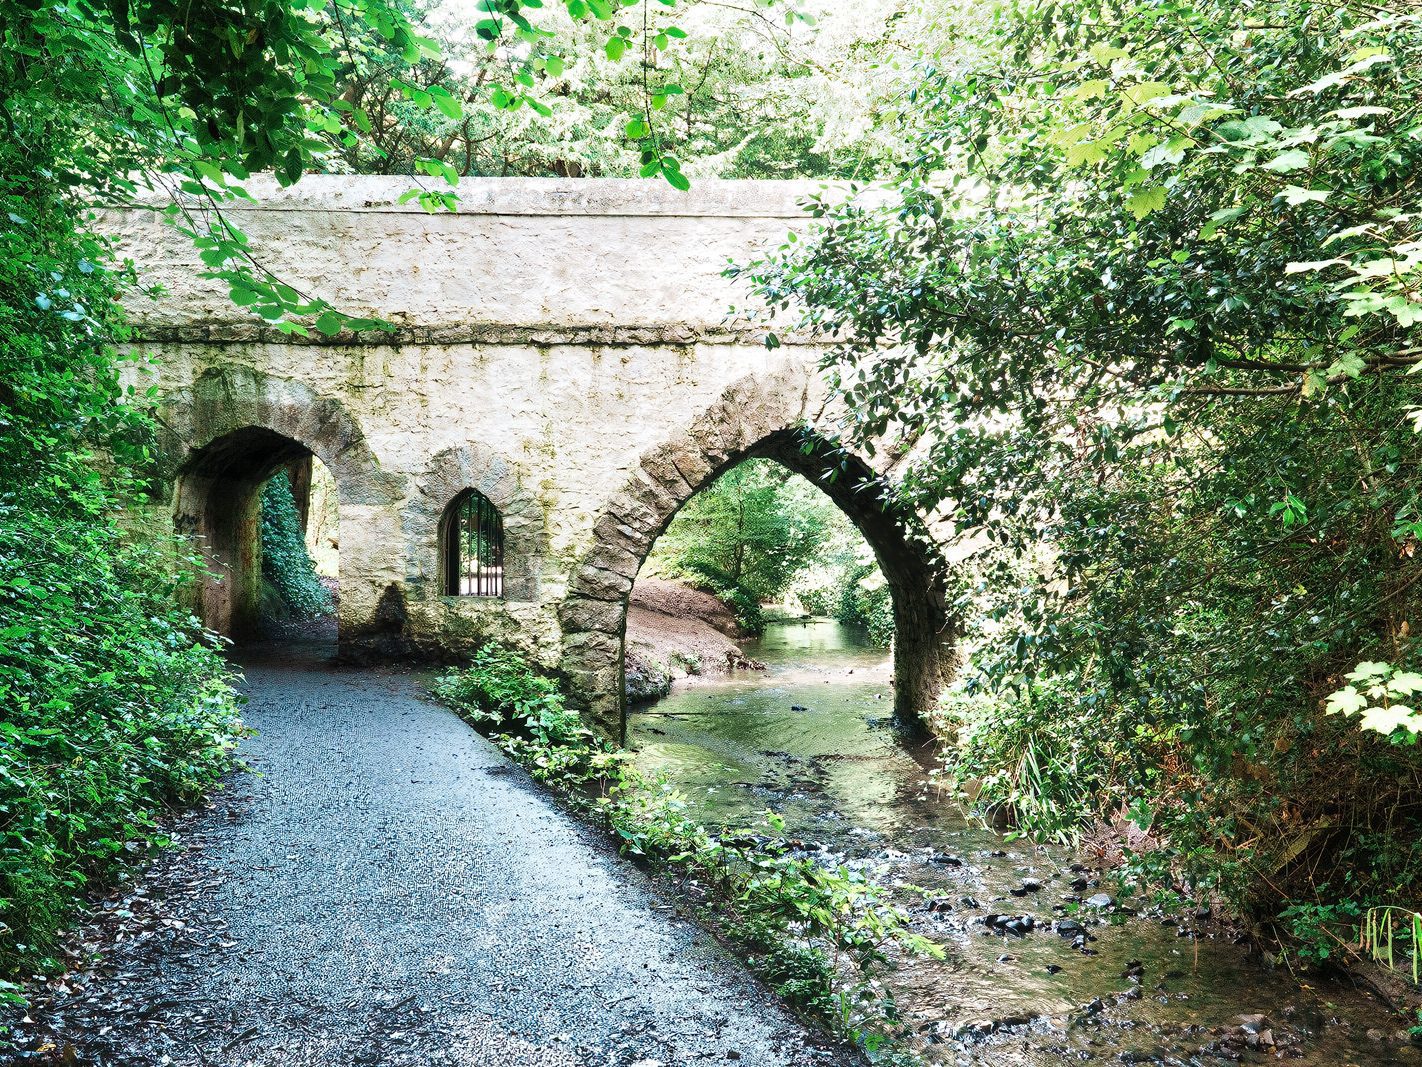 THIS IS CURRENTLY DESCRIBED AS THE GOTHIC BRIDGE [MANY GUIDES REFER TO IT AS THE BRIDGE AND HERMITAGE]-224692-1